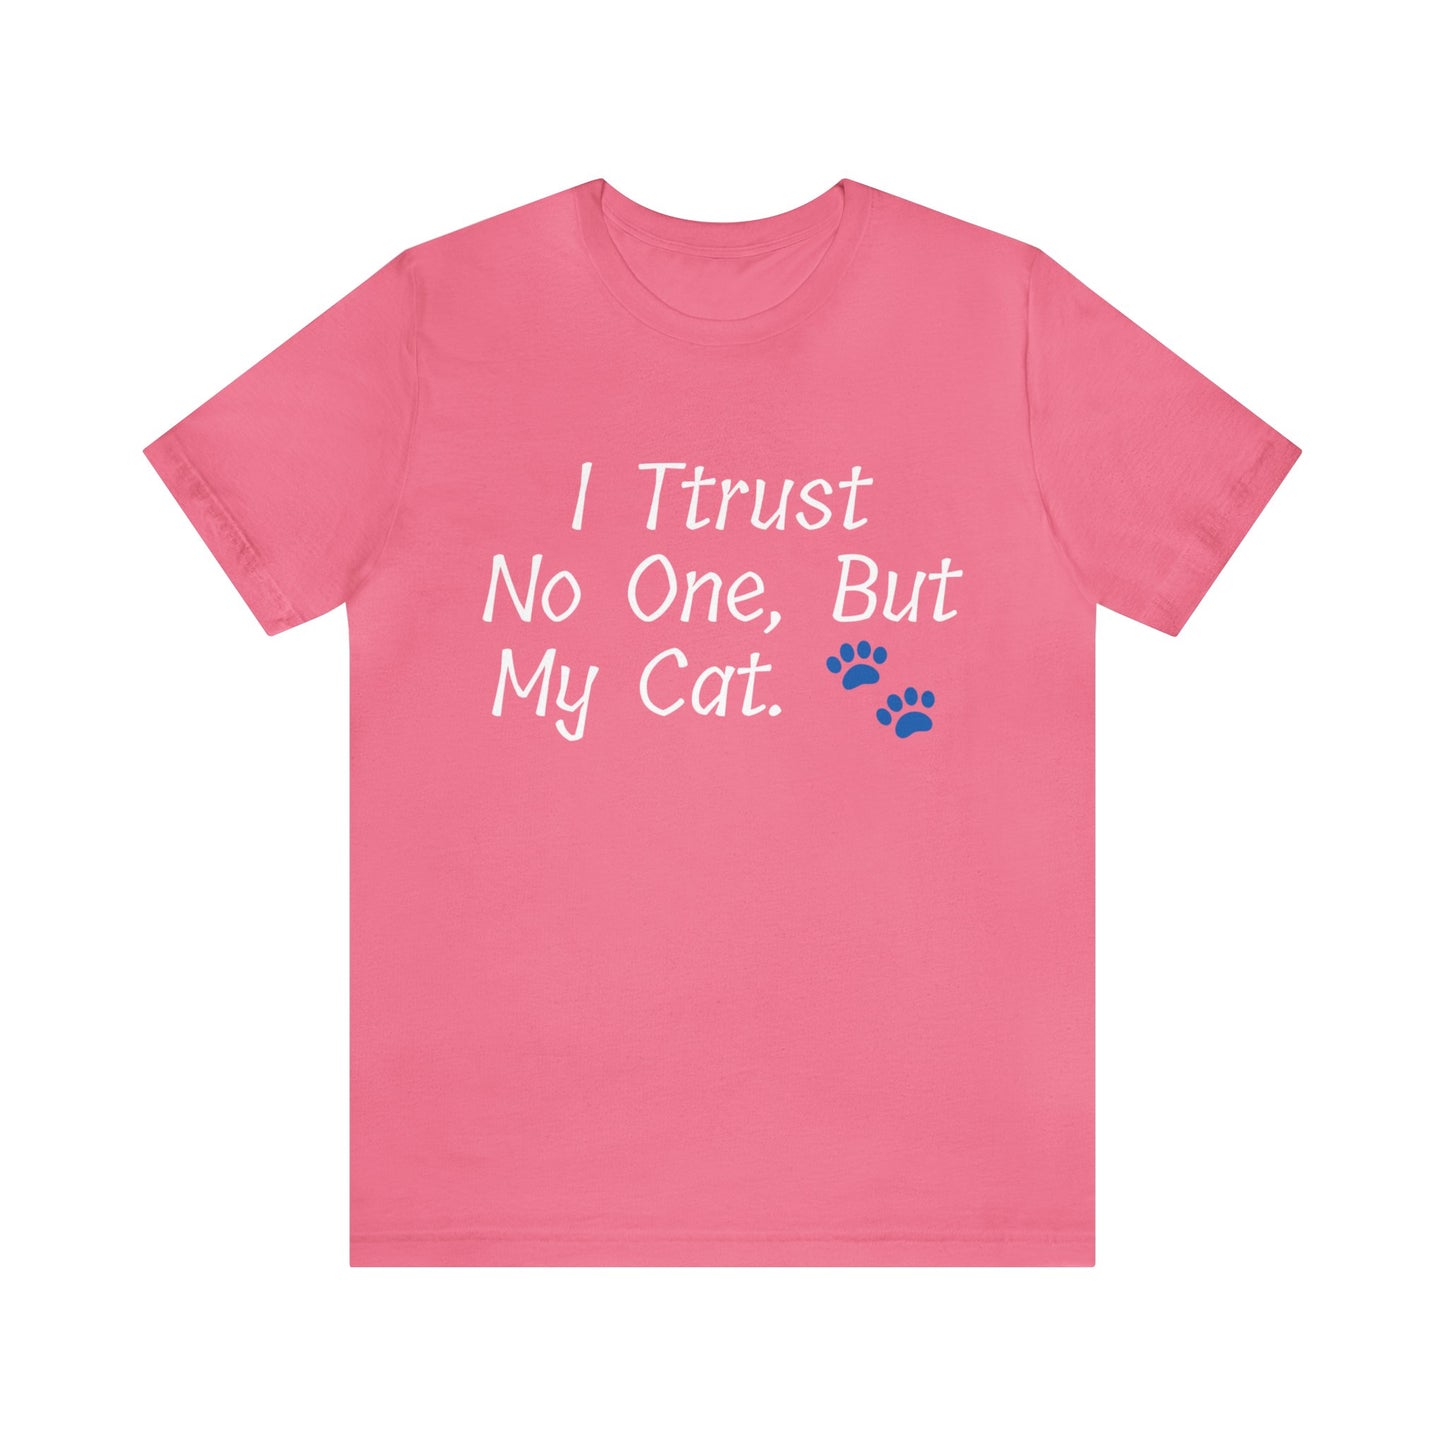 Charity Pink T-Shirt Tshirt Design Gift for Friend and Family Short Sleeved Shirt For Cat Lovers Gift Petrova Designs